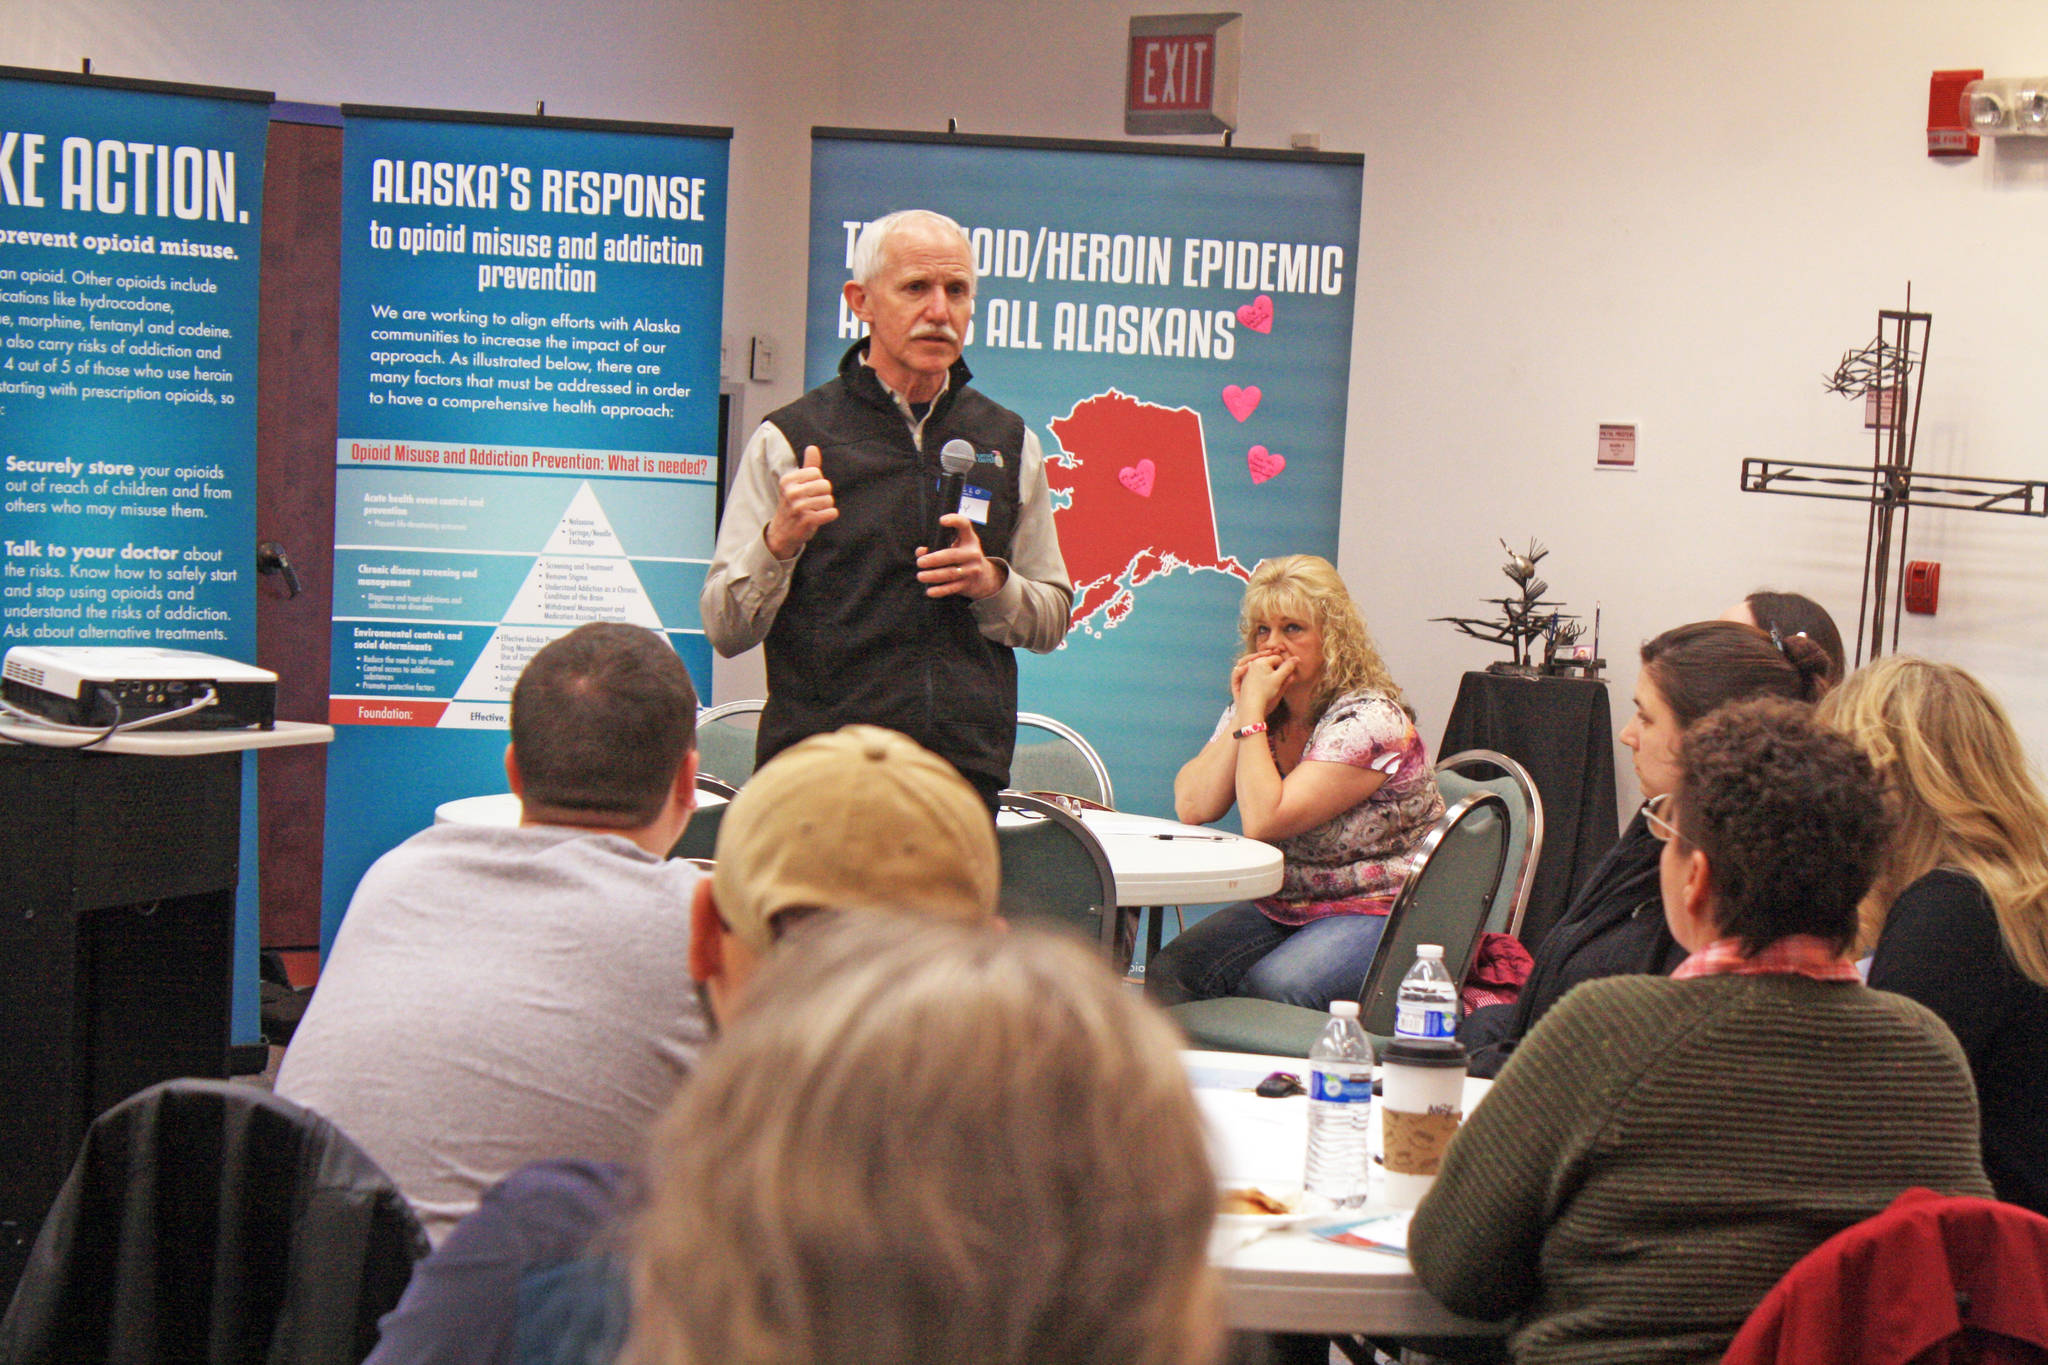 Jay Butler, chief medical officer for the Department of Health and Social Services, Division of Public Health, discusses the causes of the opioid crisis with members of the community at the Your Voice, Your Community forum on Thursday, March 8, 2018 at the Kenai Visitors and Cultural Center in Kenai, Alaska. (Photo by Erin Thompson/Peninsula Clarion)